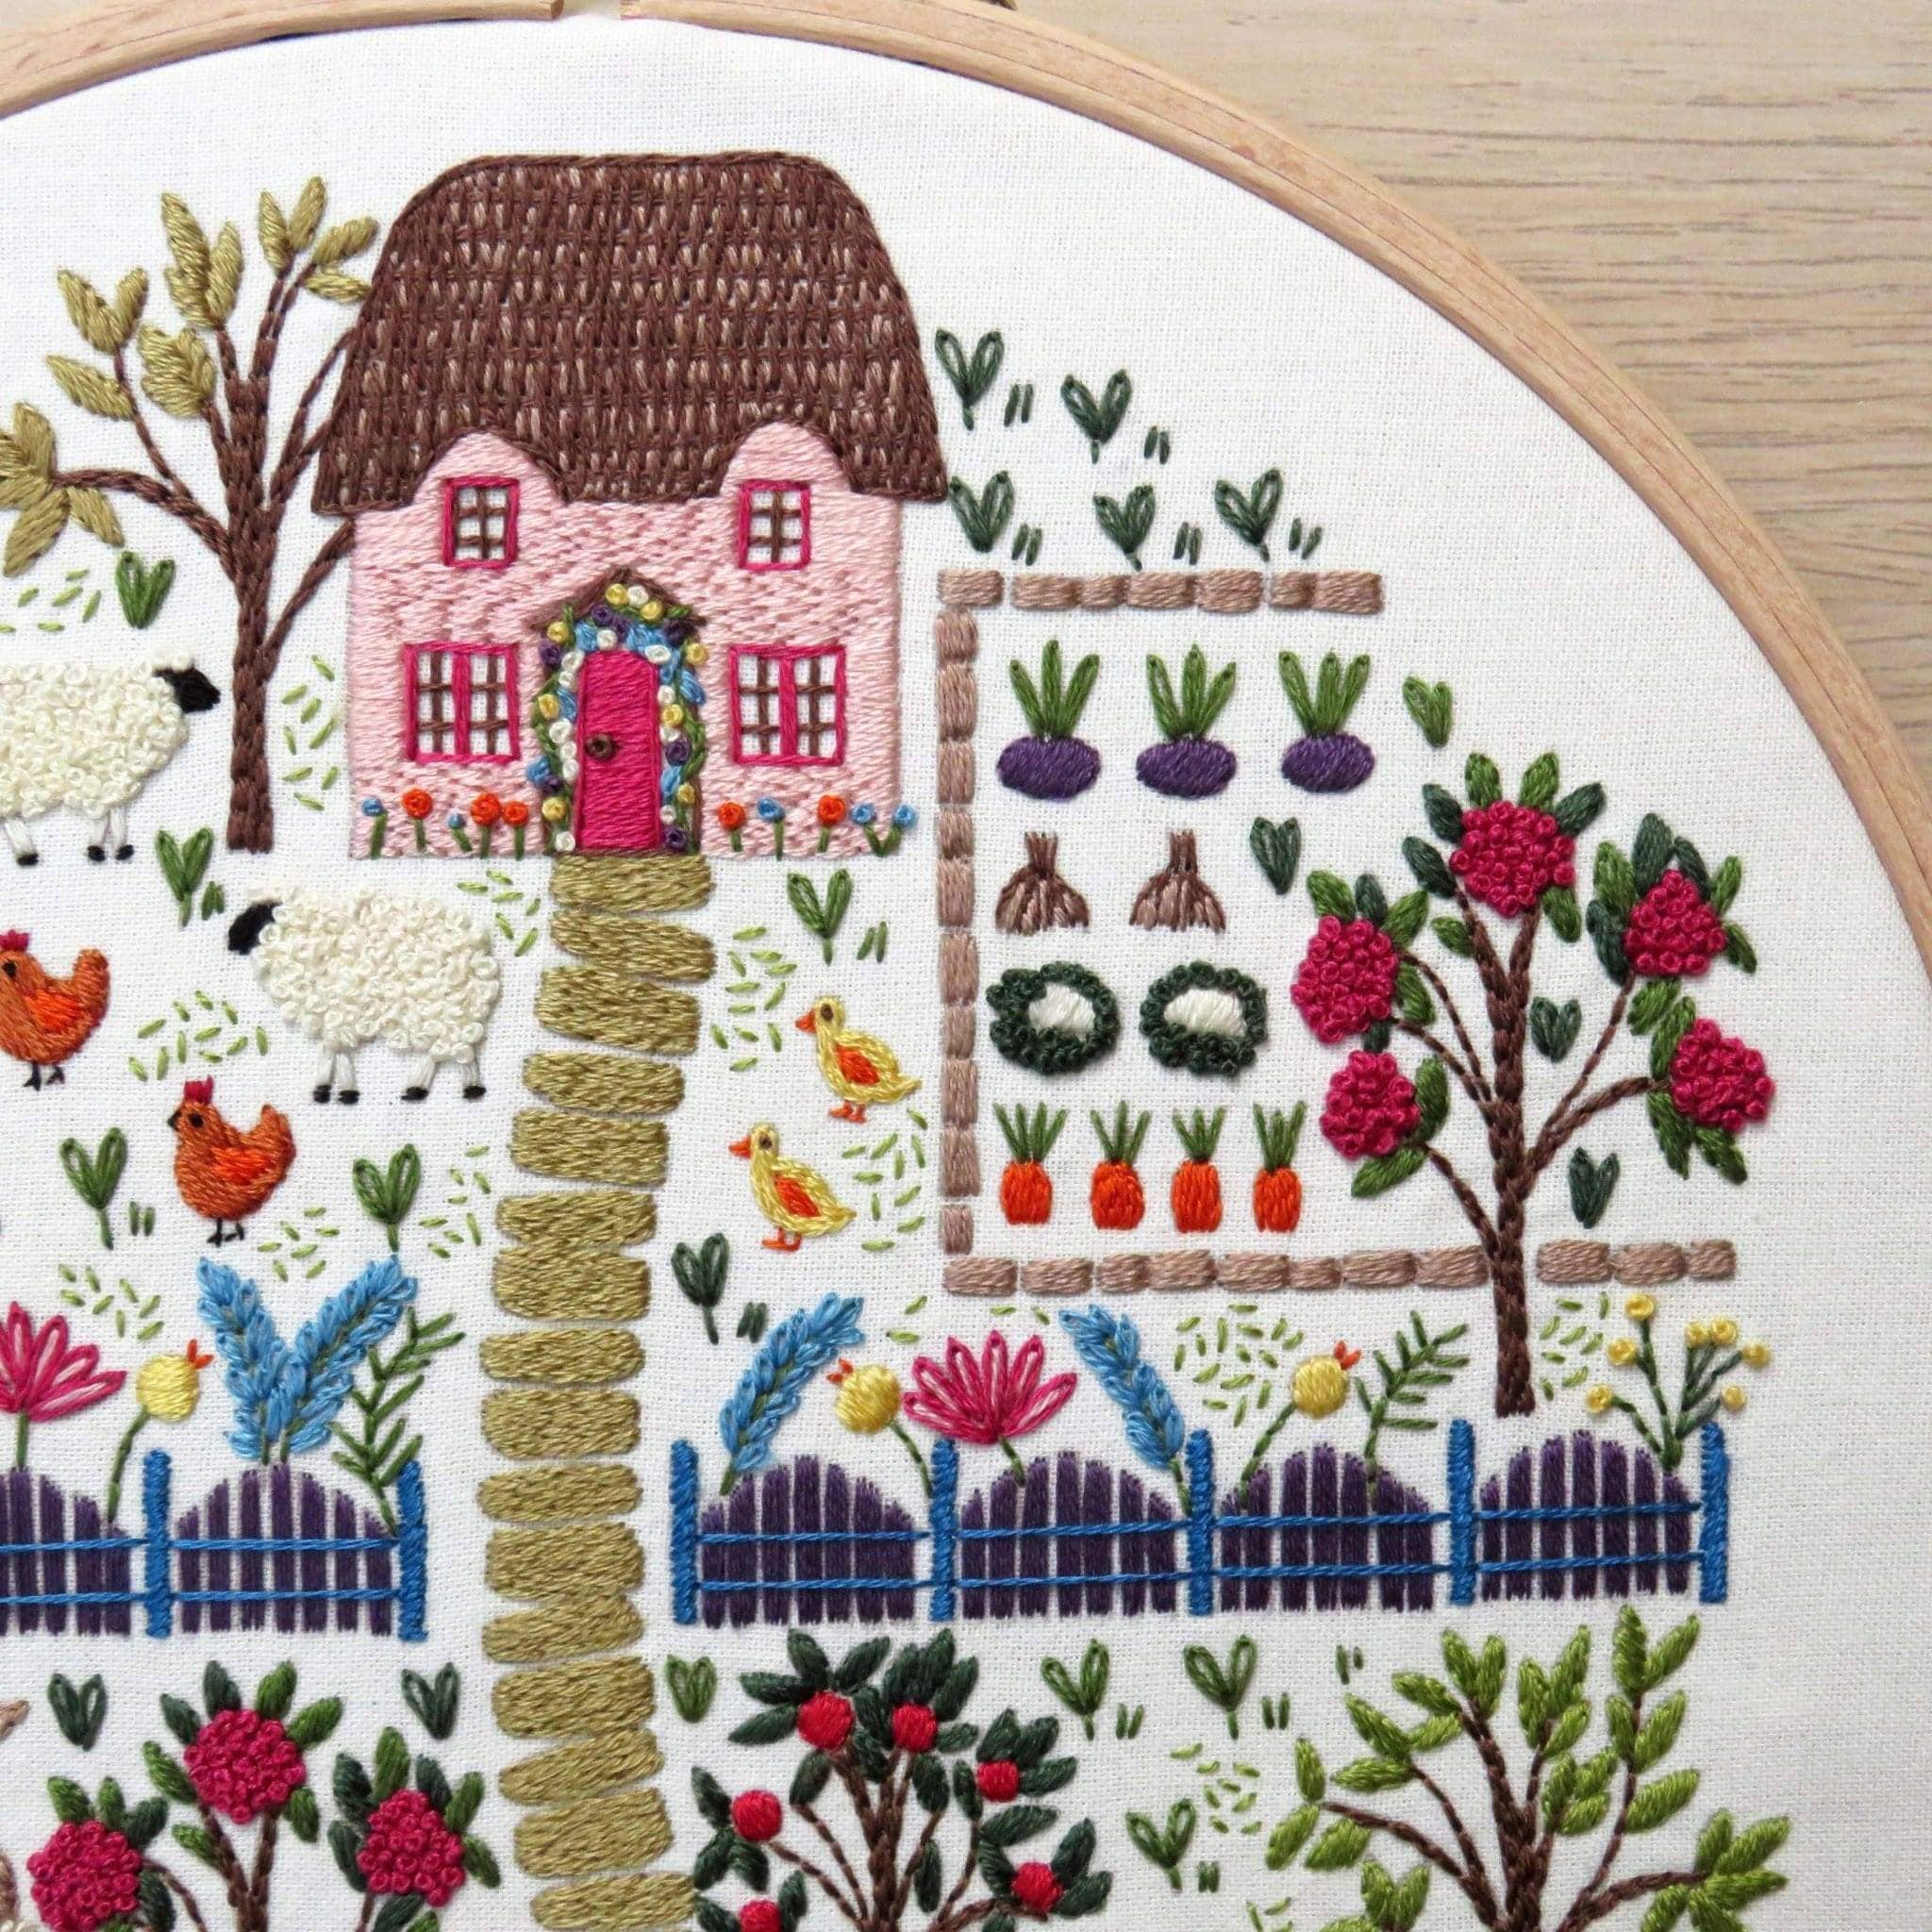 The Homestead, Pre Printed Embroidery Fabric Panel PLUS PDF Pattern , Pre Printed Fabric Pattern , StitchDoodles , bird embroidery, Embroidery, embroidery hoop, embroidery hoop kit, embroidery kits for beginners, embroidery pattern, garden embroidery, hand embroidery, hand embroidery fabric, hand embroidery kit, hand embroidery seat frame, nurge embroidery hoop, PDF pattern, Printed Pattern, unique embroidery kits , StitchDoodles , shop.stitchdoodles.com